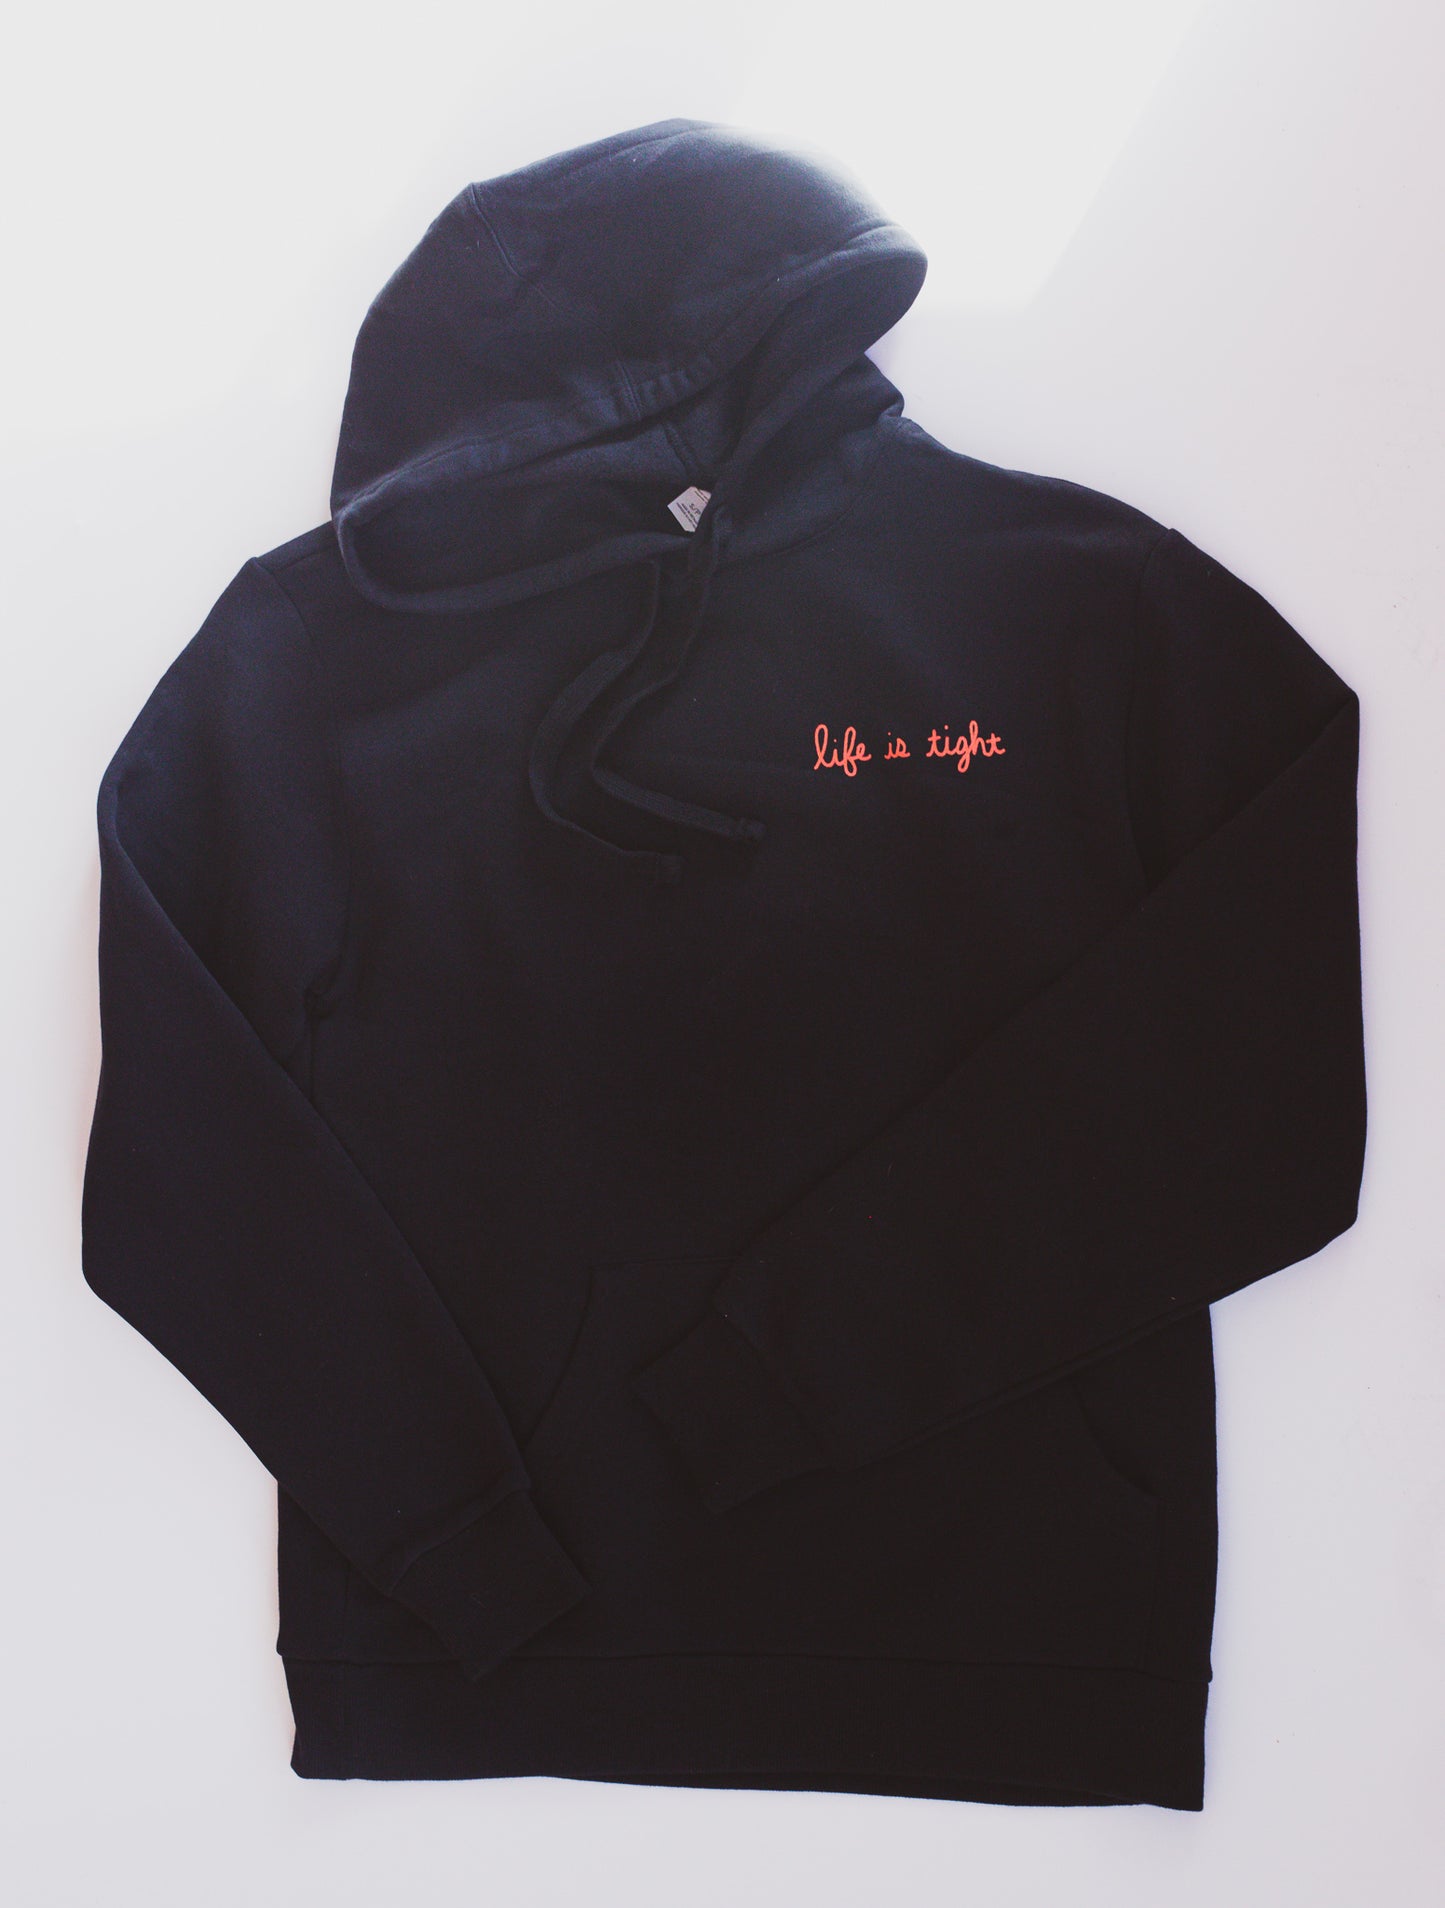 Life is Tight "Sky Diving" Pullover Hoodie // Black